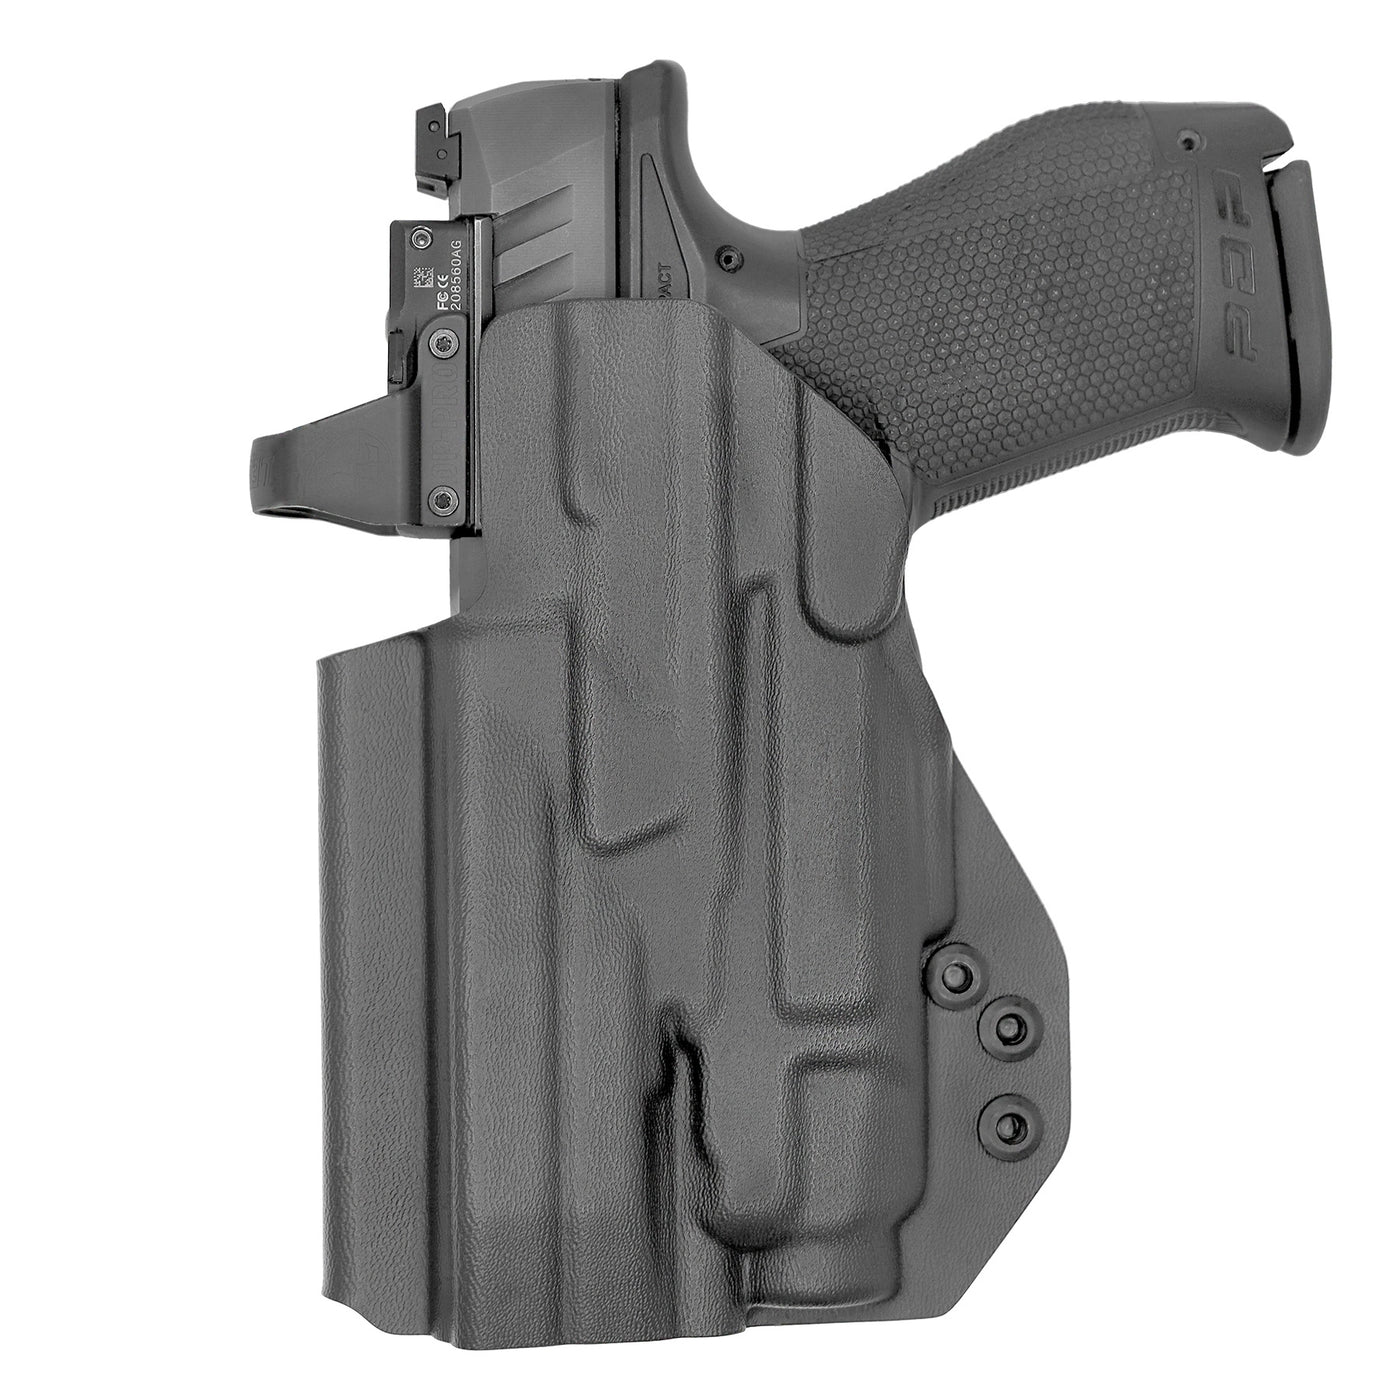 C&G Holsters quickship IWB Tactical CZ P07/09 Streamlight TLR7/a in holstered position back view